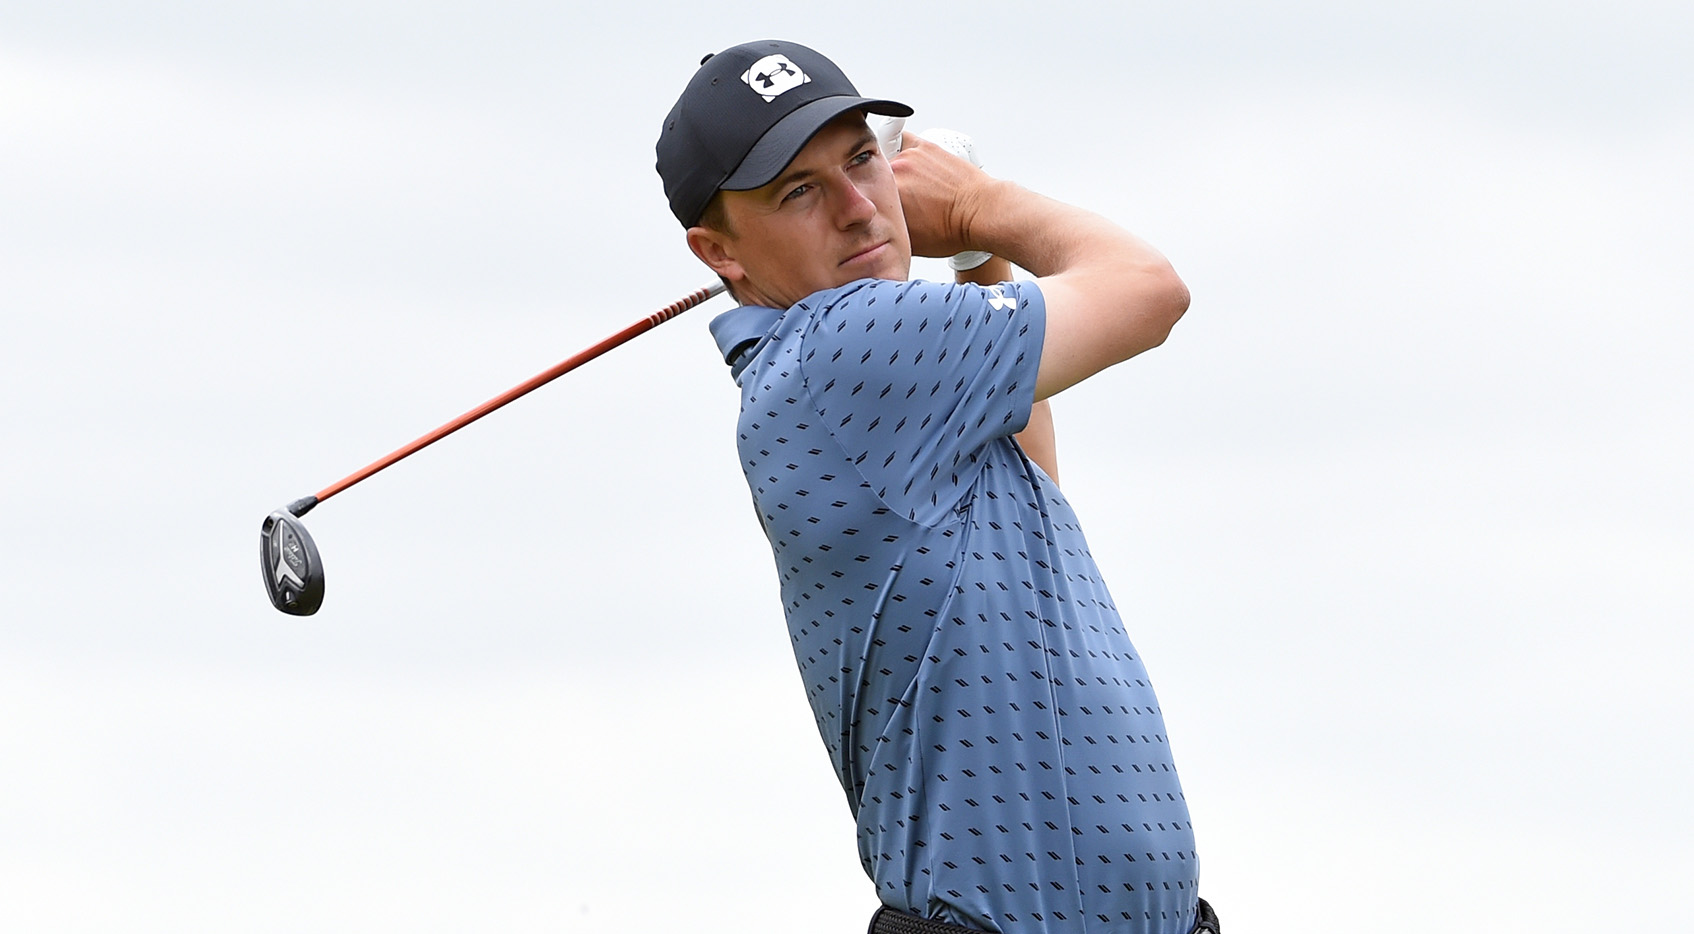 Jordan Spieth ends winning drought with victory at Valero Texas Open